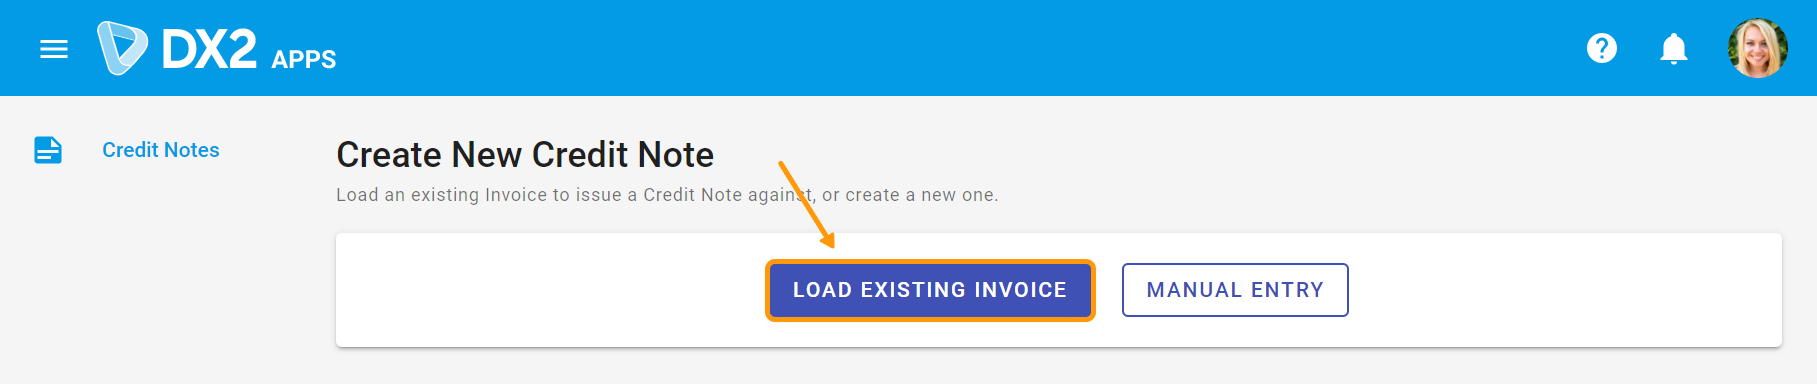 Button for loading an existing invoice against a new credit note